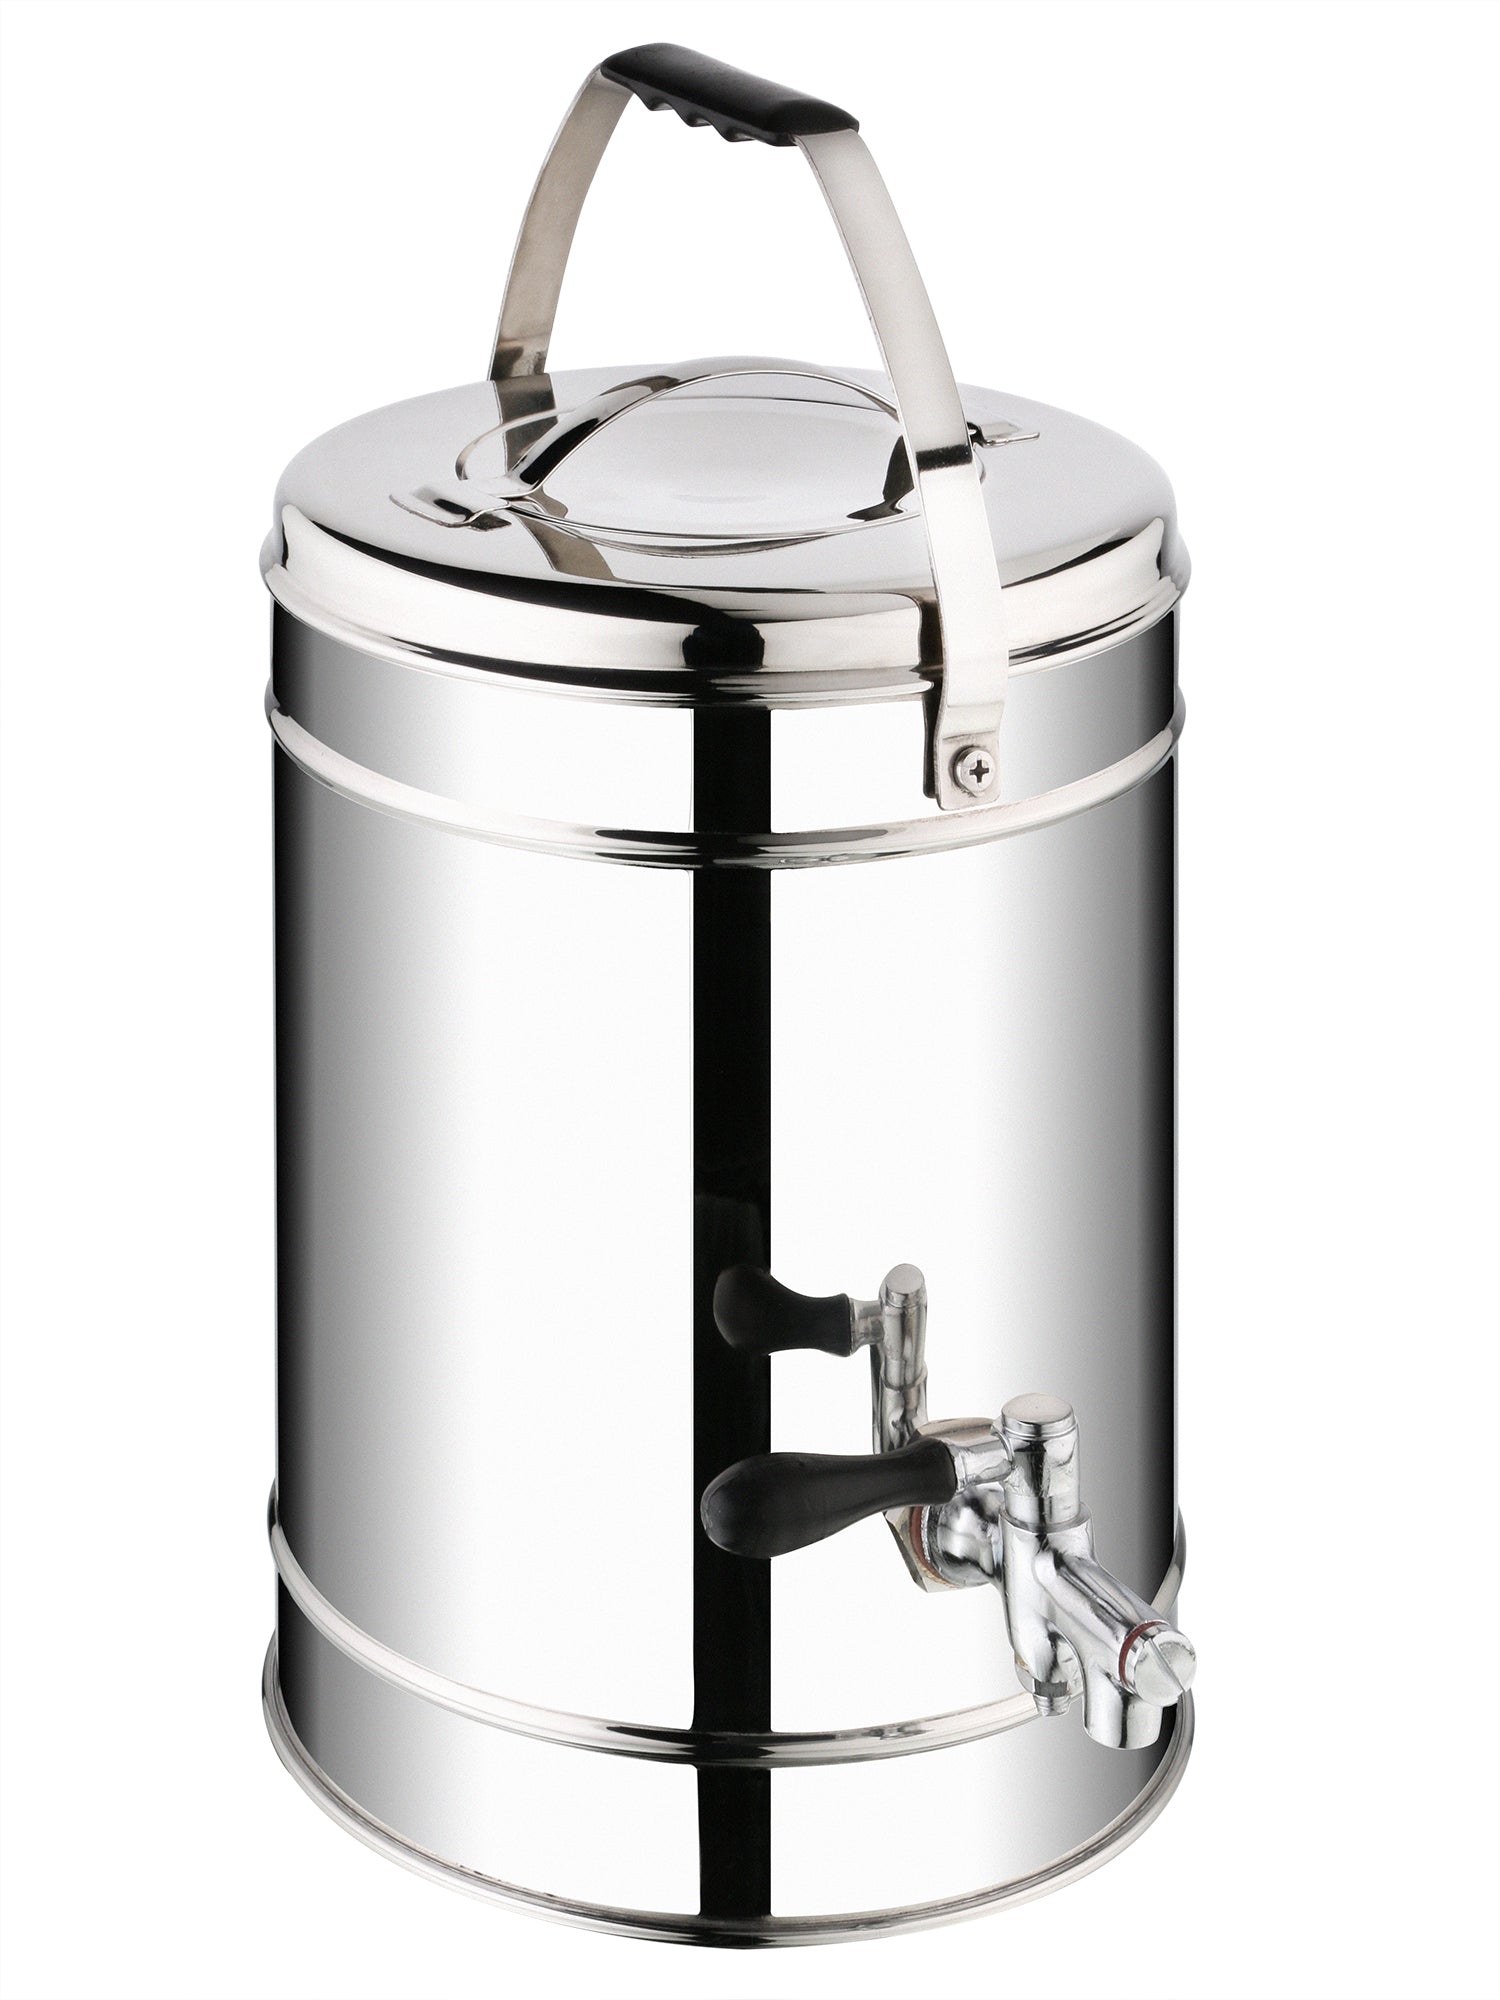 NanoNine T-Urn 2.5 L Double Wall Insulated Stainless Steel Tea Pot.